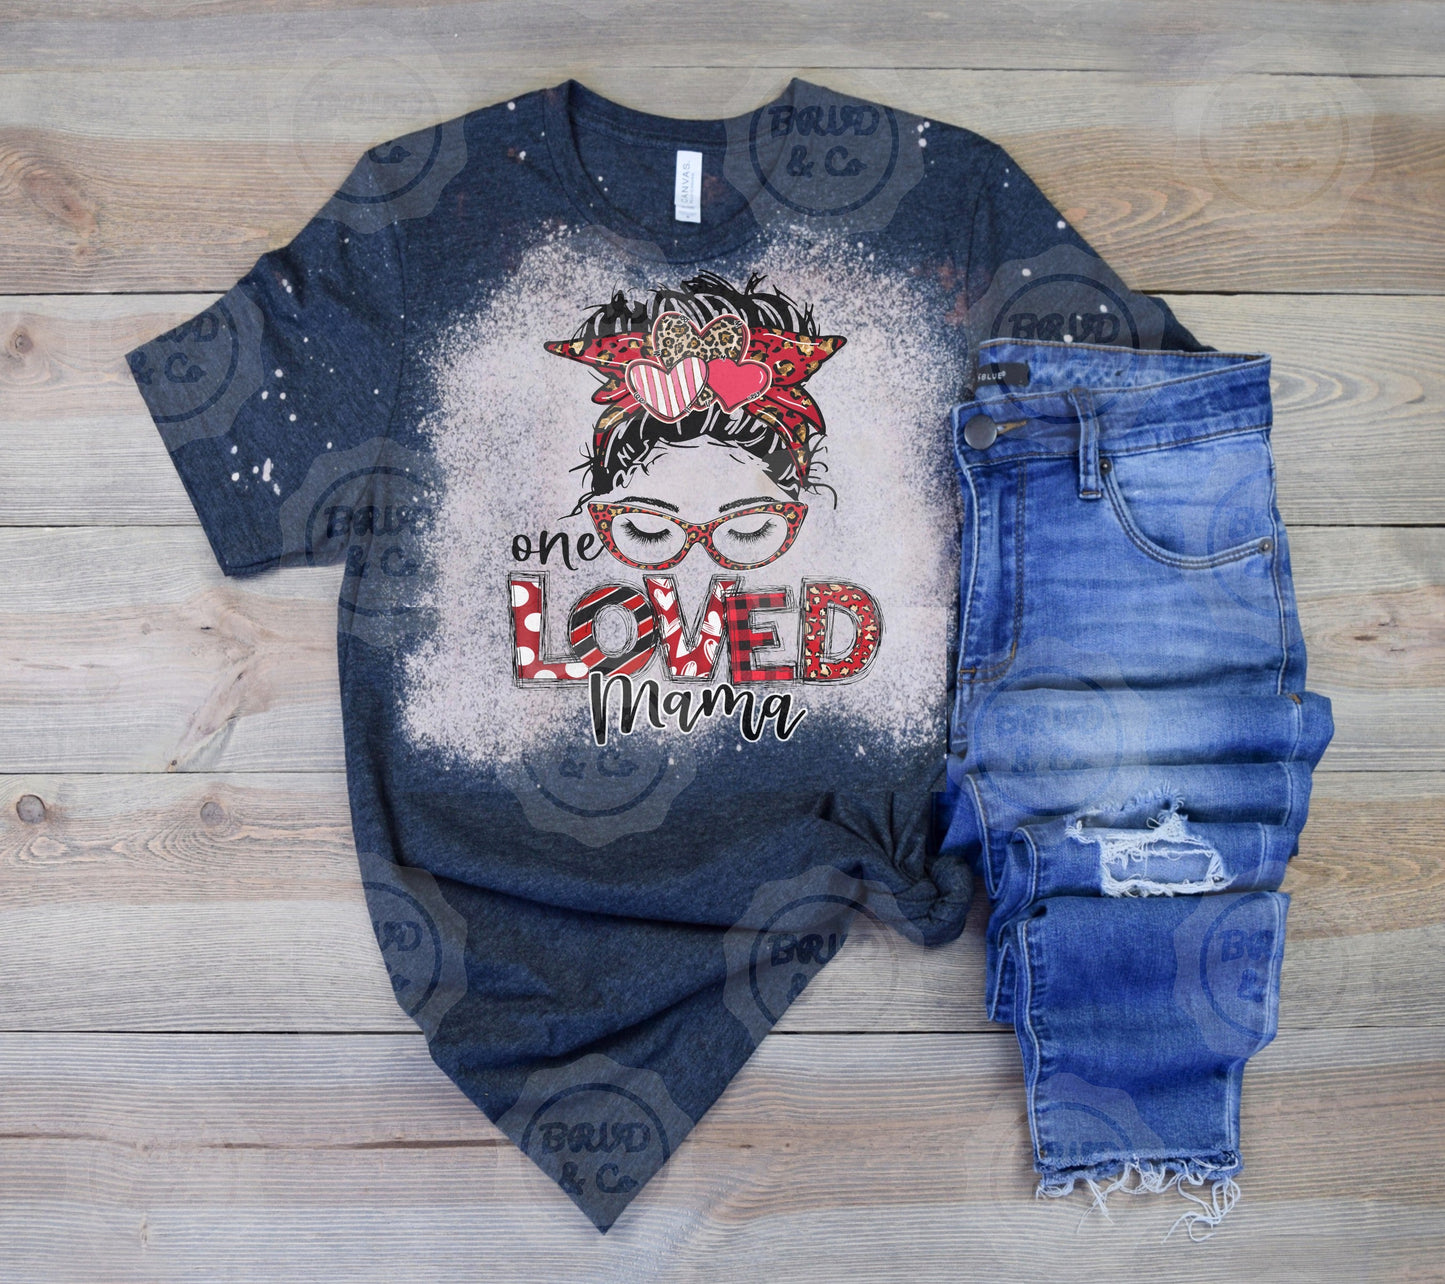 "One loved mama" Bleached T-Shirt